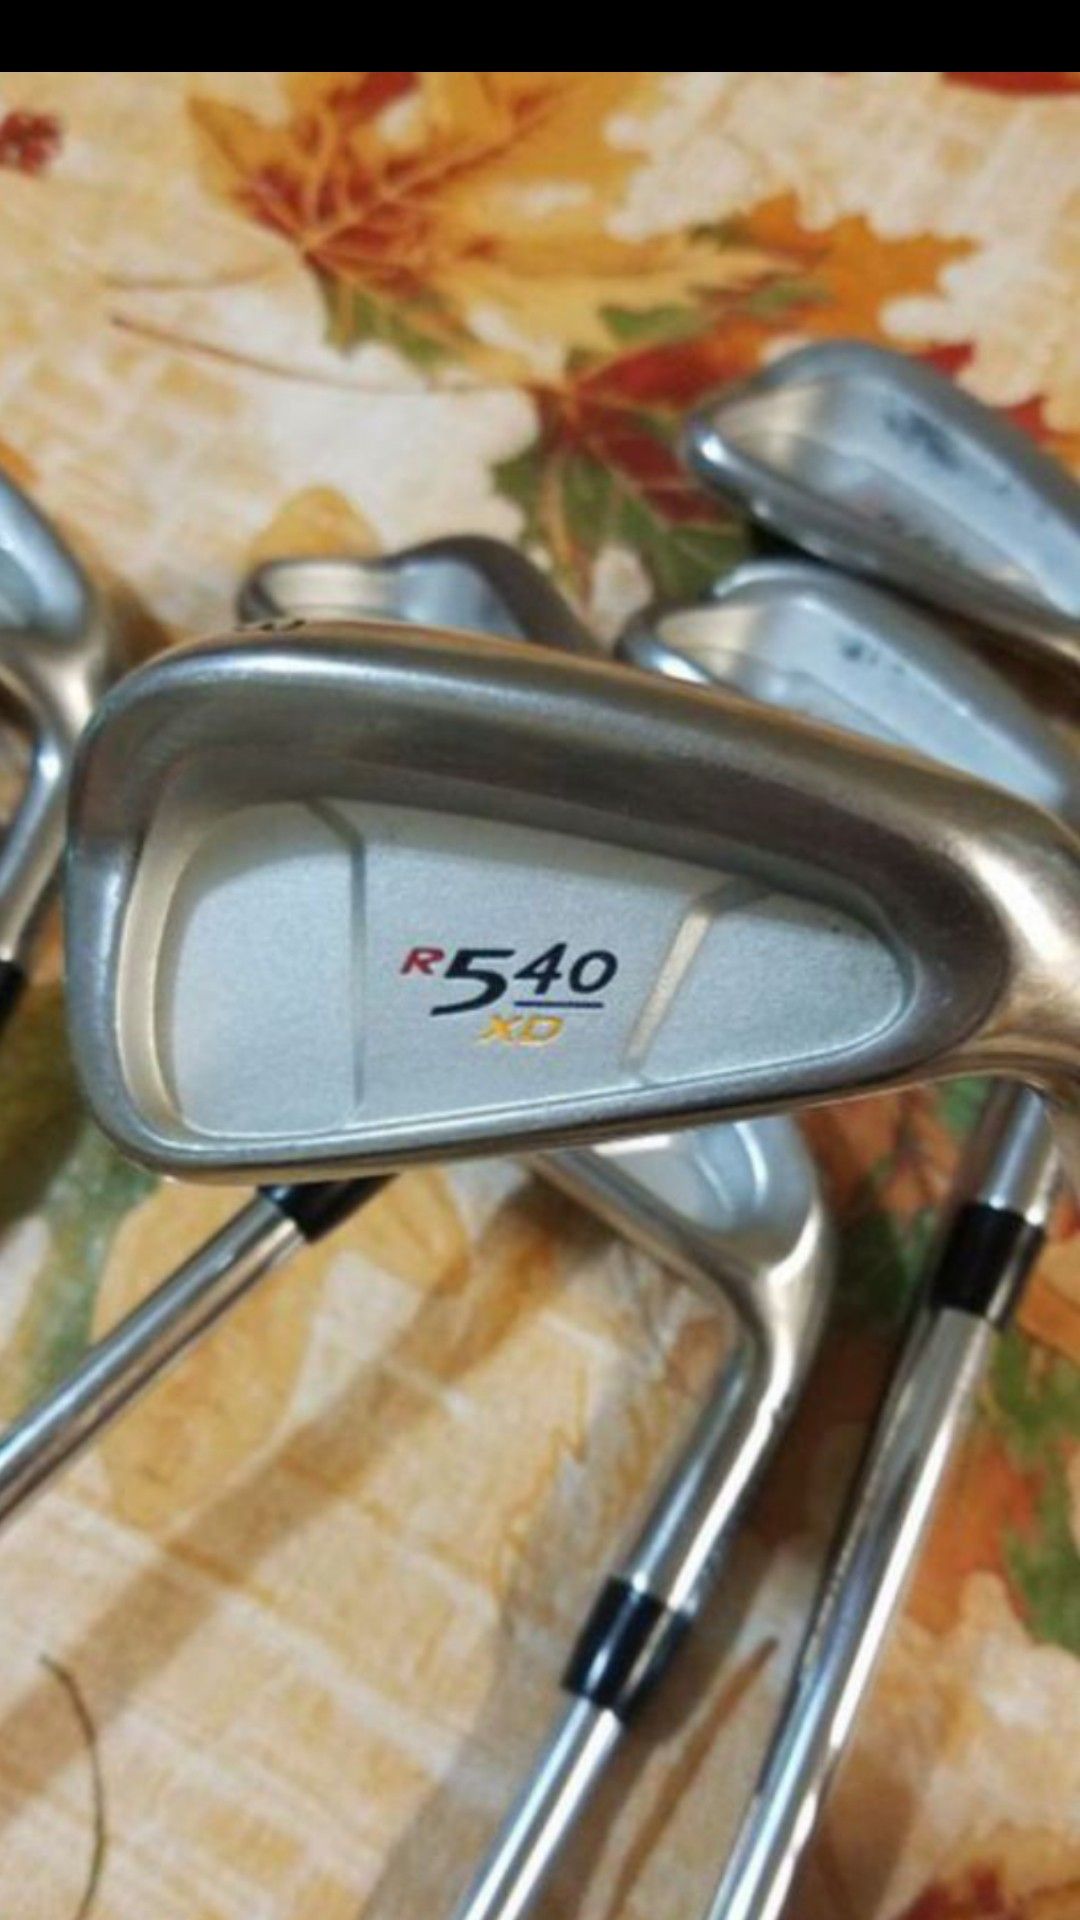 GREAT CONDITION! TAYLORMADE R540 XD GOLF CLUB IRON SET WITH 3 WOOD